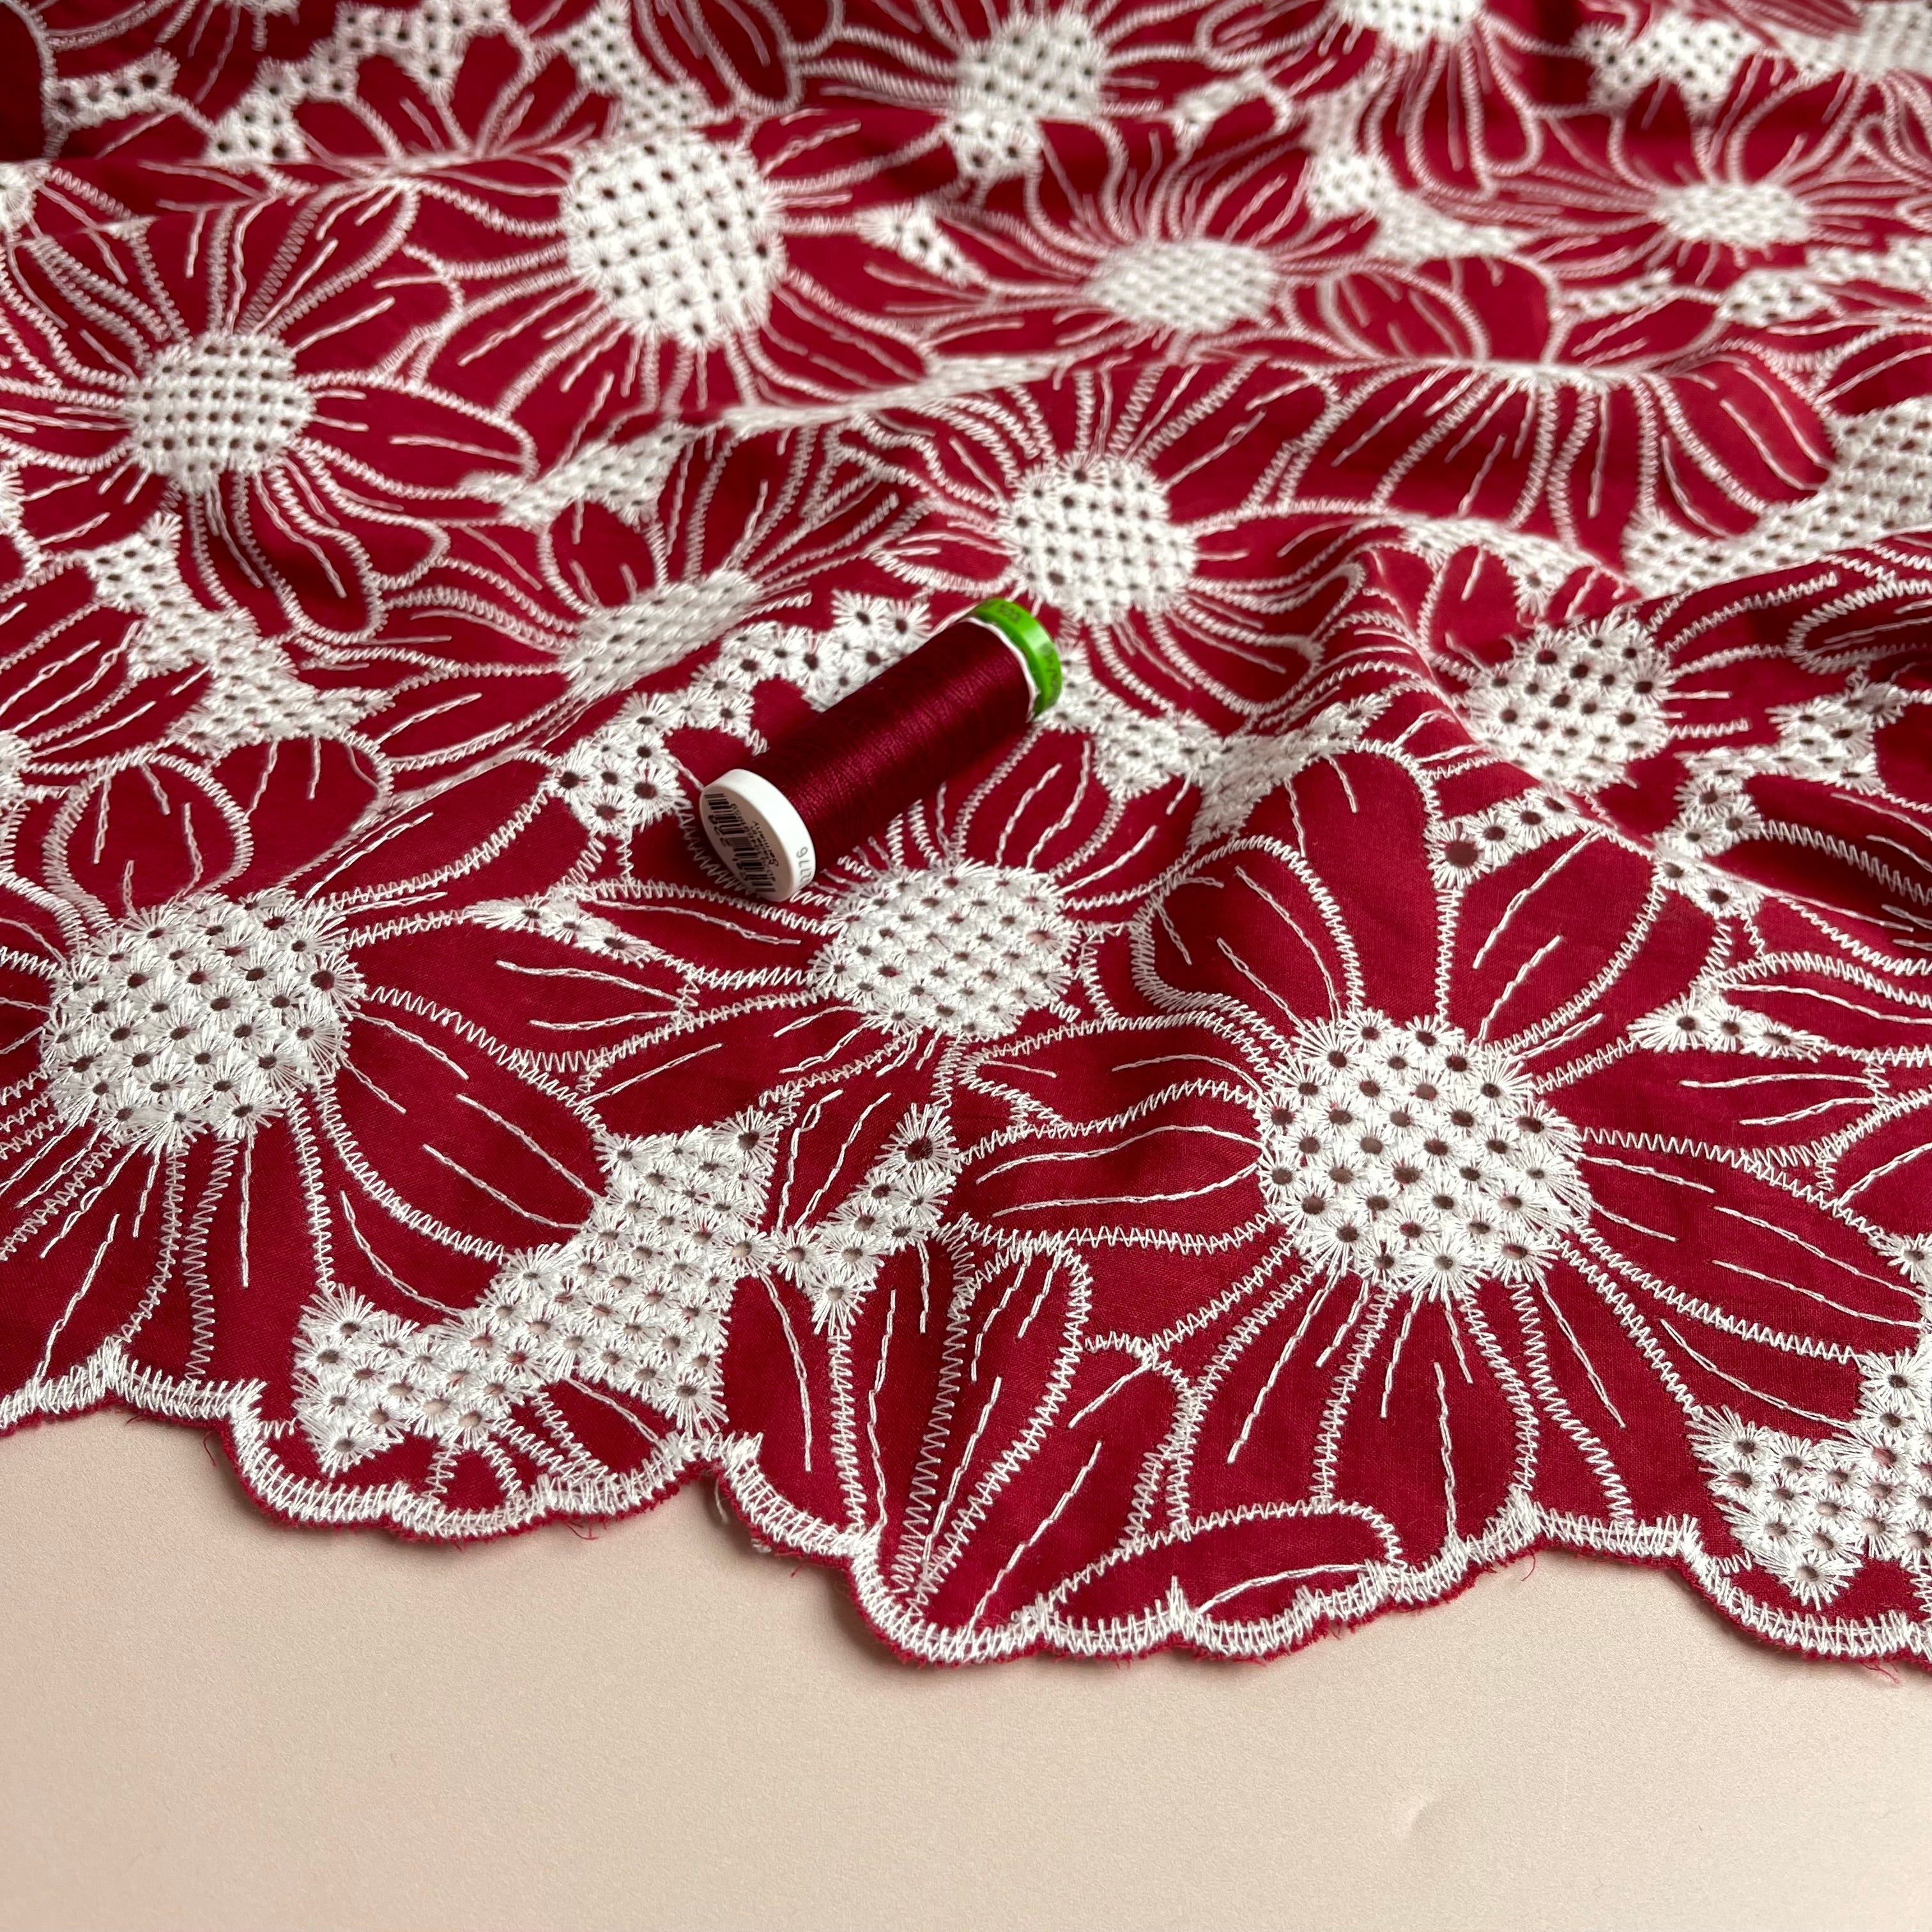 REMNANT 1.4 Metres - Scalloped Flowers Embroidered Cotton Fabric in Red